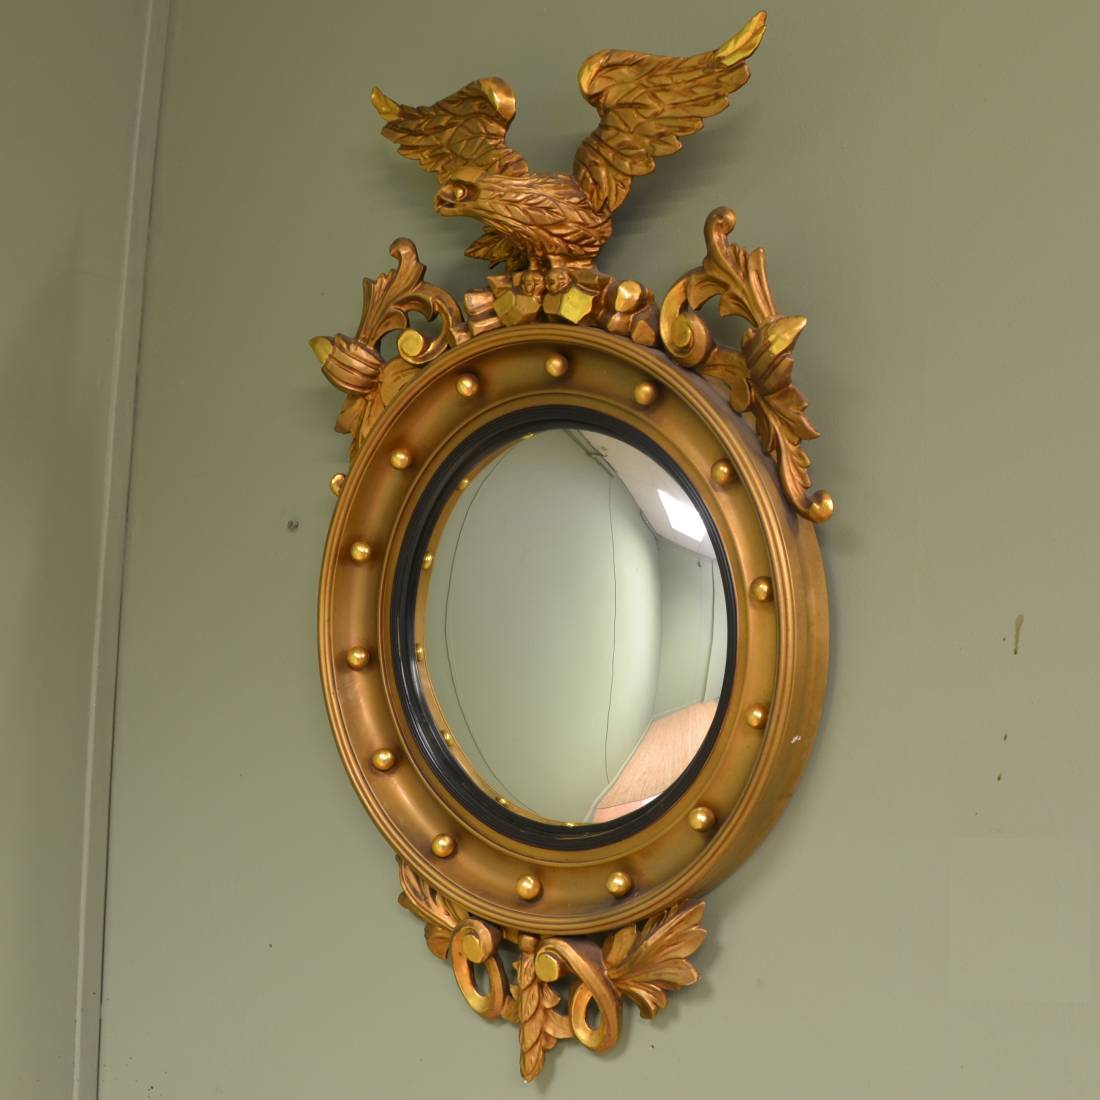 Antique Mirrors, How To Resilver A Mirror Uk